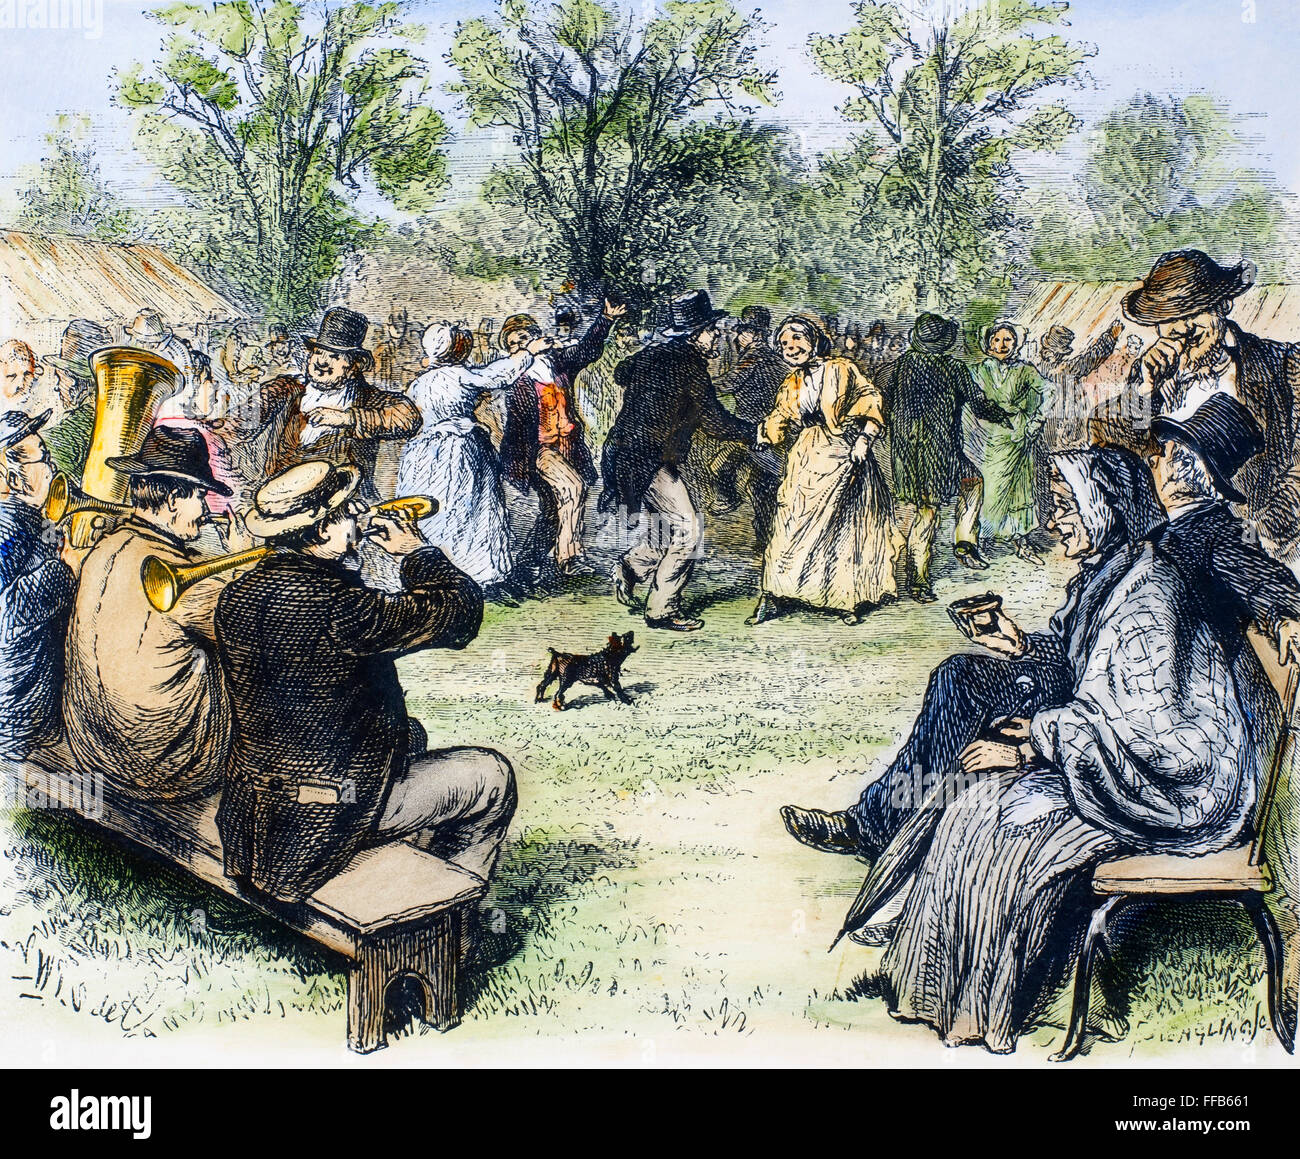 COUNTRY DANCE, c1870. /nA country dance on the American frontier. Wood engraving, c1870. Stock Photo